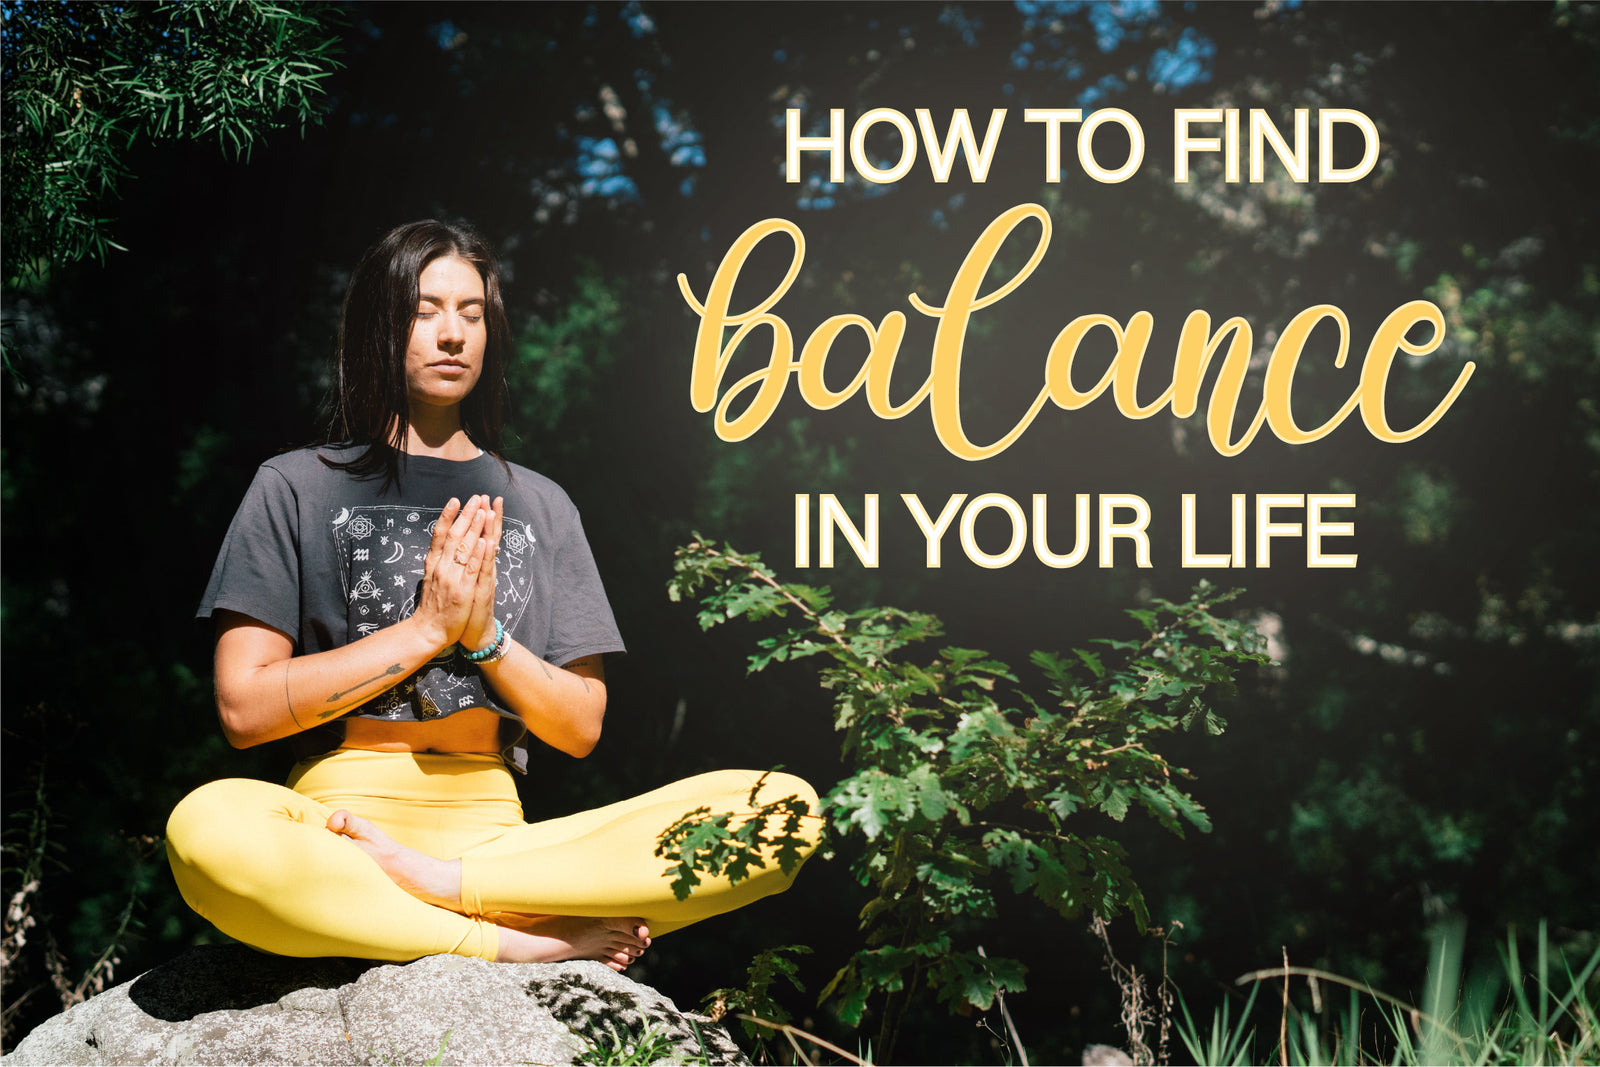 12 TIPS TO FINDING BALANCE IN YOUR LIFE!